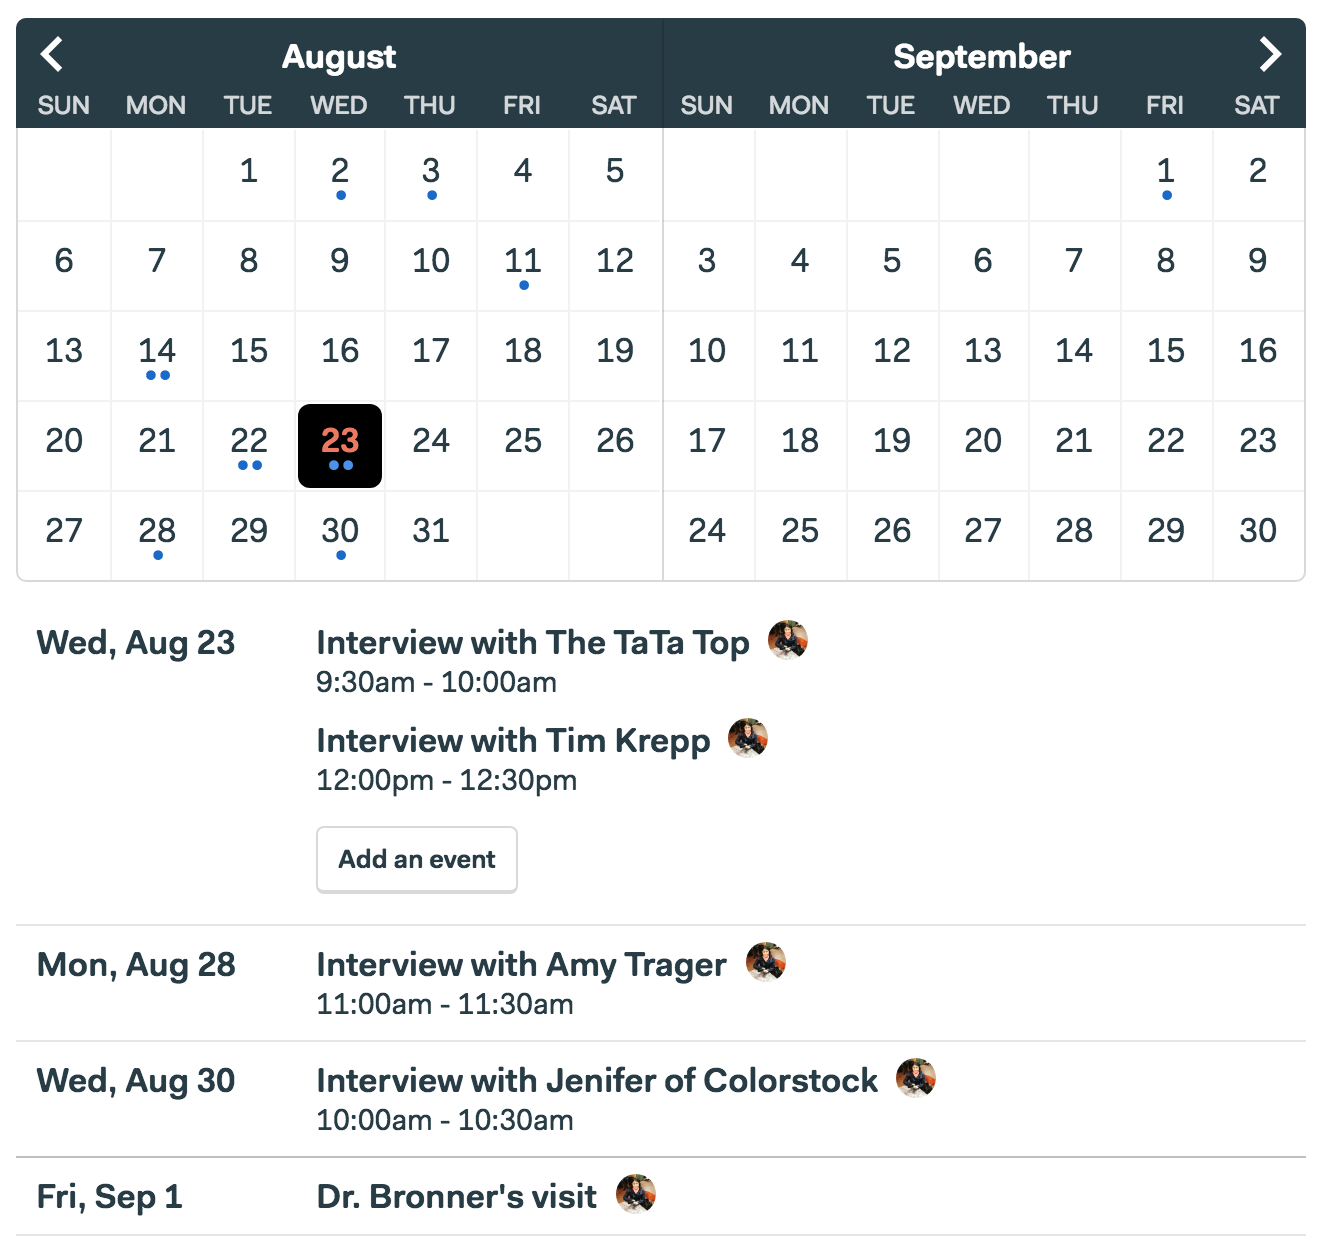 A screenshot of the final Dot Grid calendar as built in Basecamp. It has the same structure as the rough sketch but it is fully designed down to every detail.